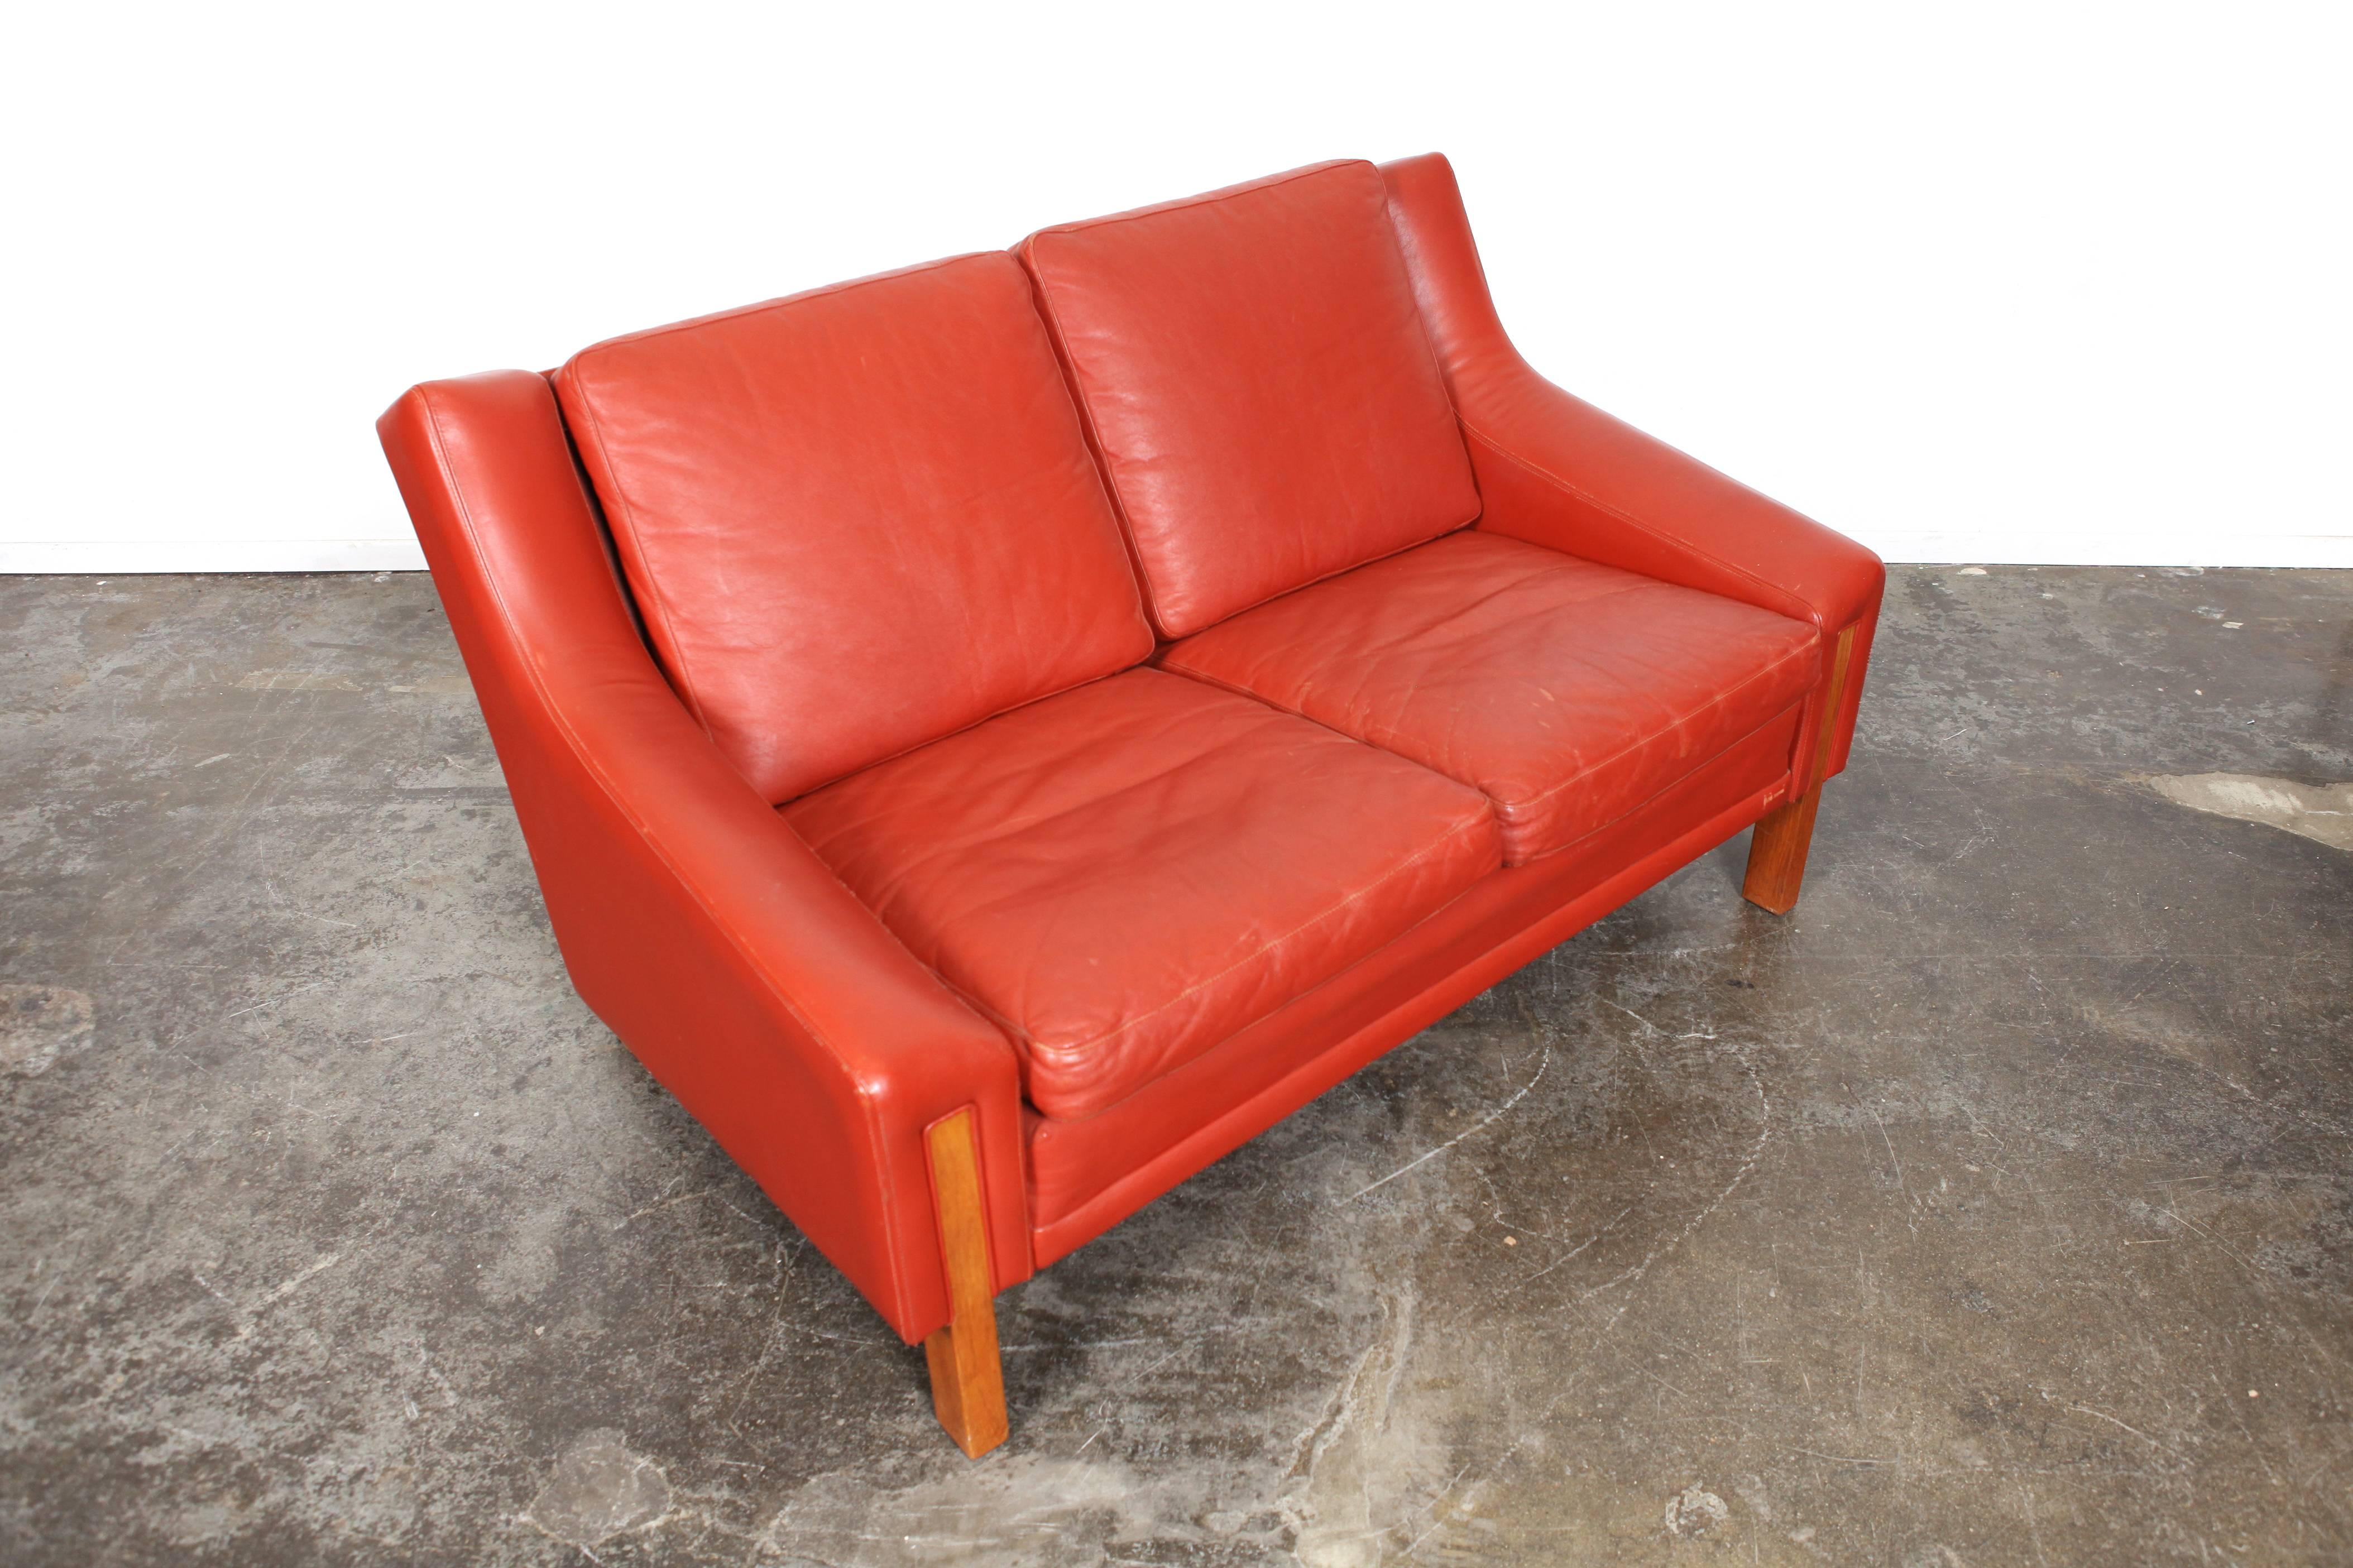 Mid-20th Century Mid-Century Modern Danish Red Leather Loveseat For Sale